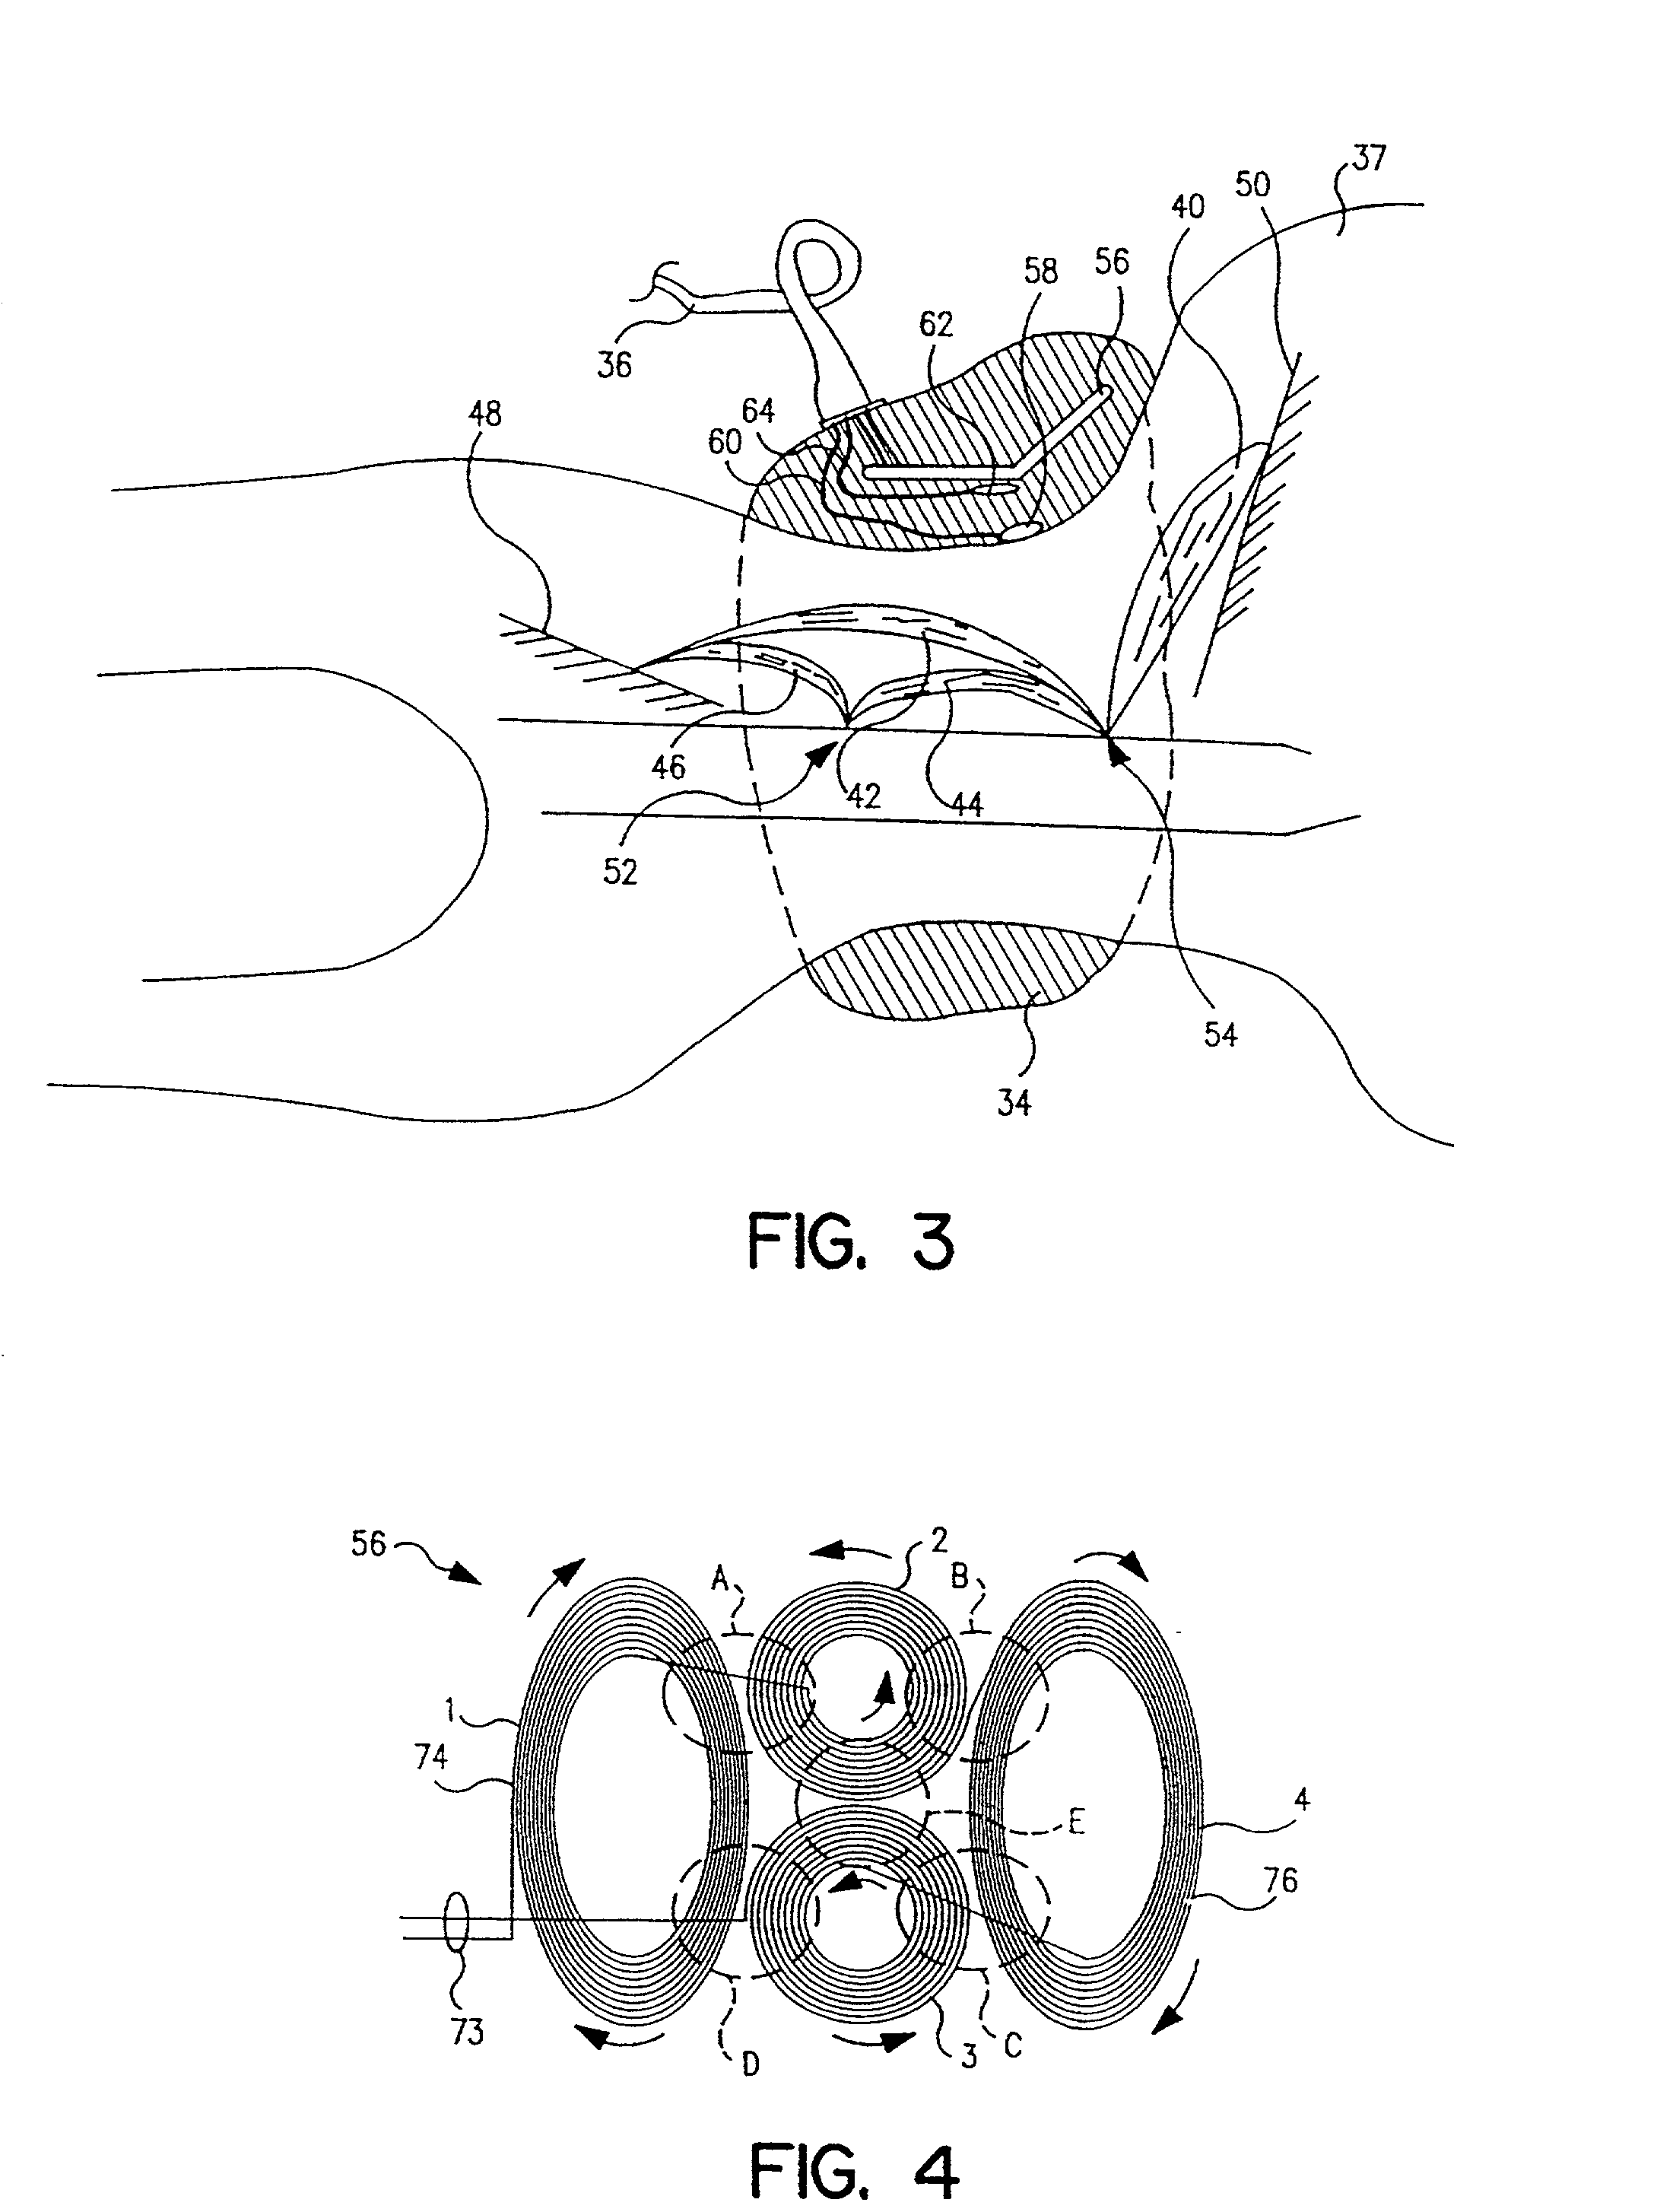 Muscle stimulating device and method for diagnosing and treating a breathing disorder